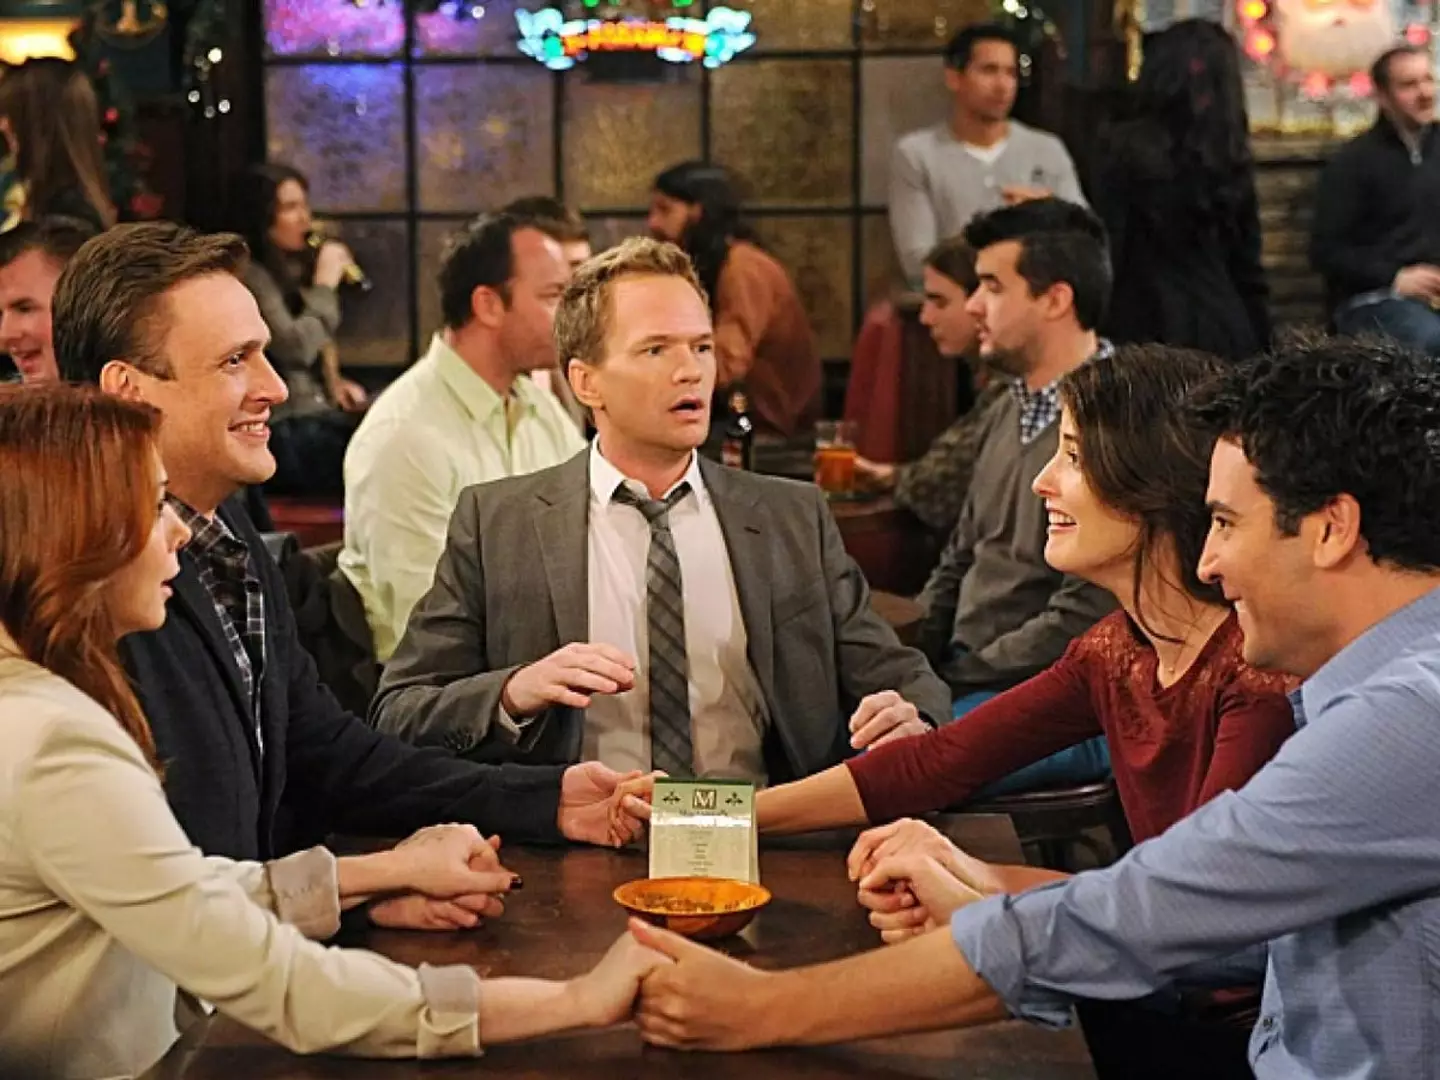 The HIMYM ending was deemed controversial (